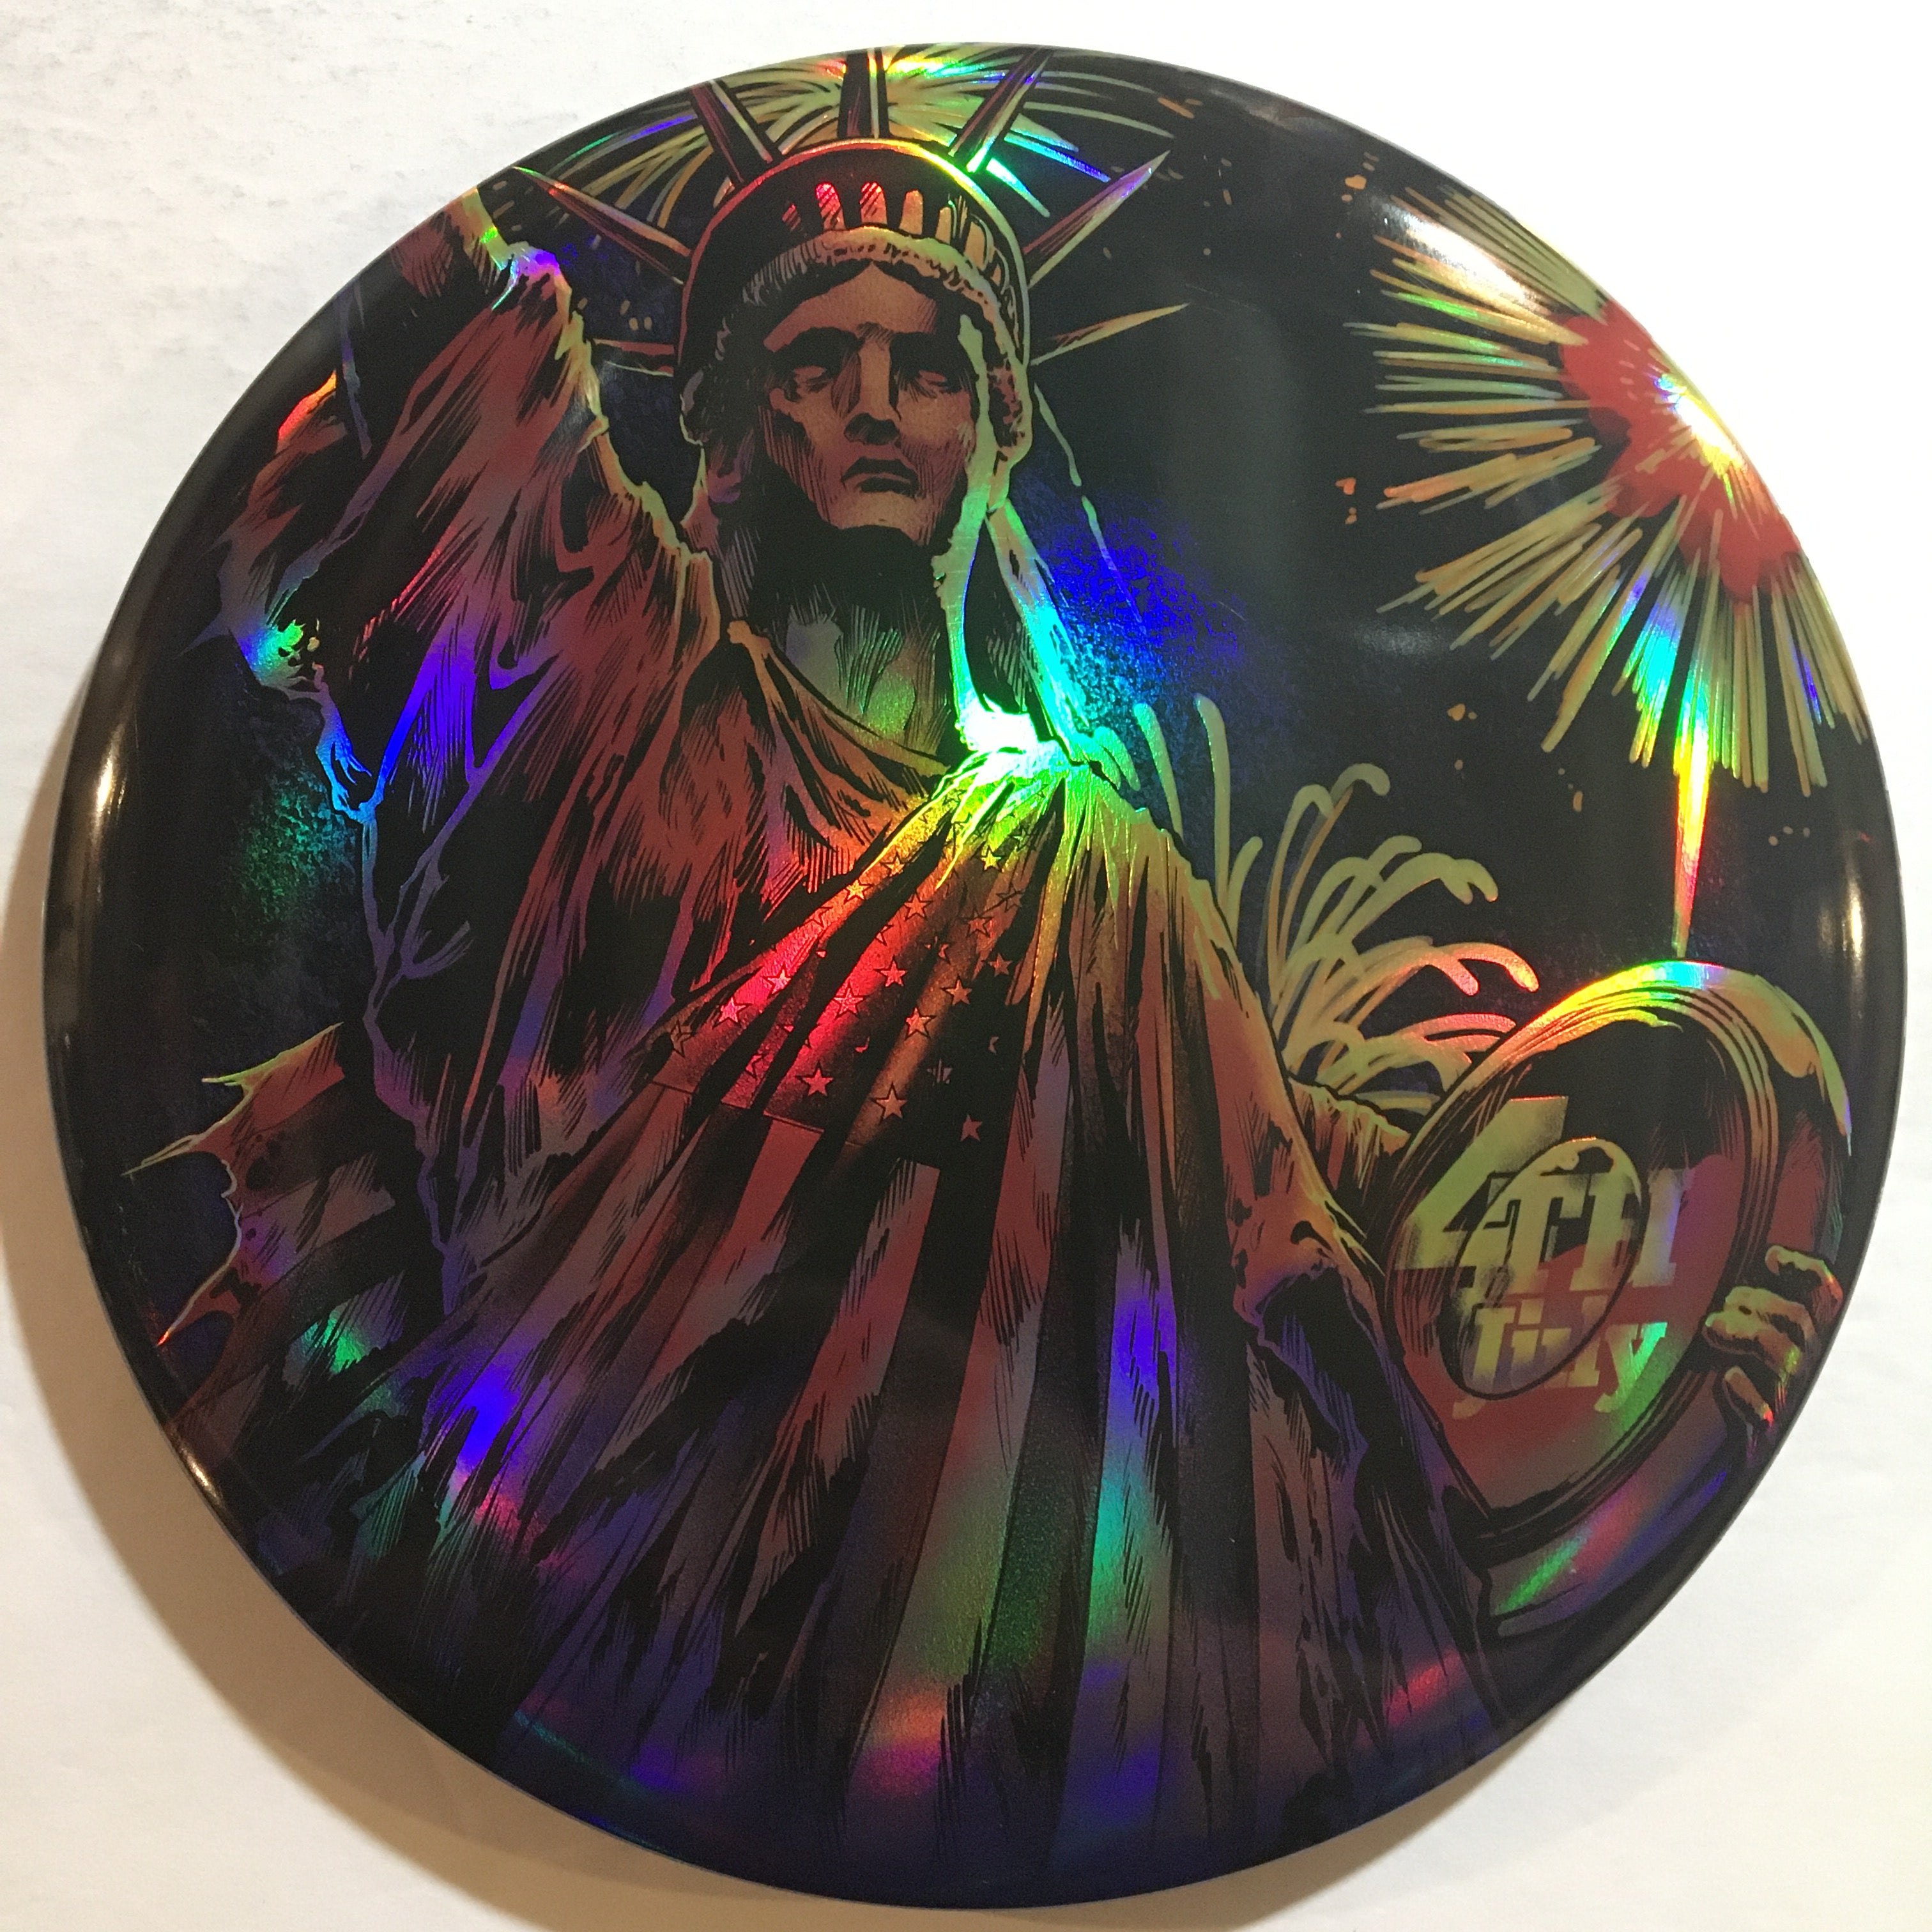 Buzzz Full Foil (Statue of Liberty) LIMITED EDITION